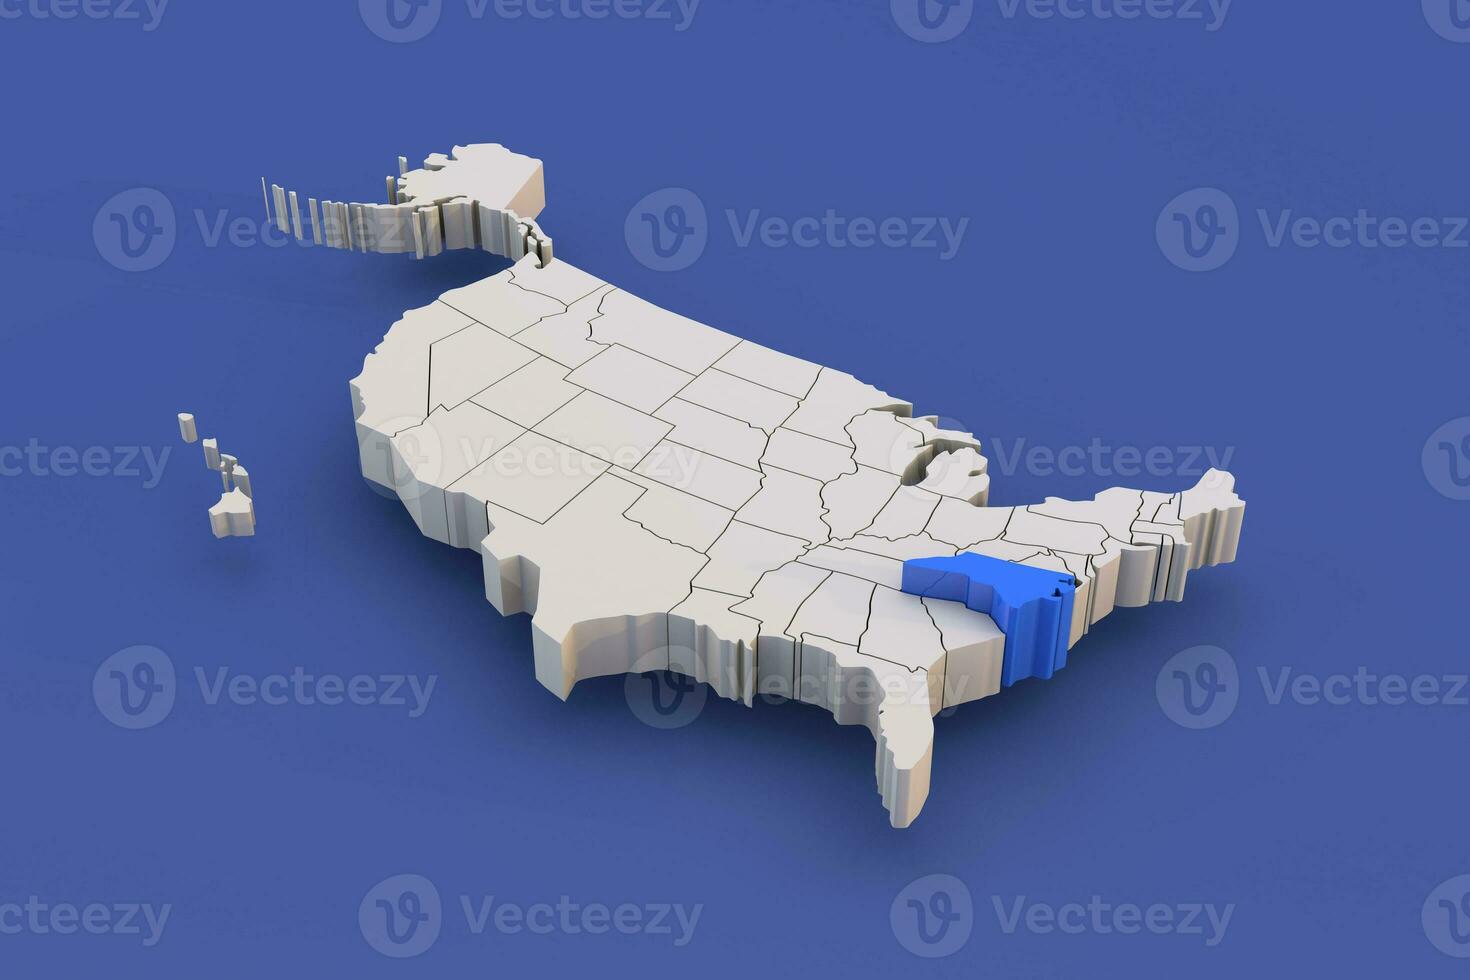 North Carolina state of USA map with white states a 3D united states of america map photo